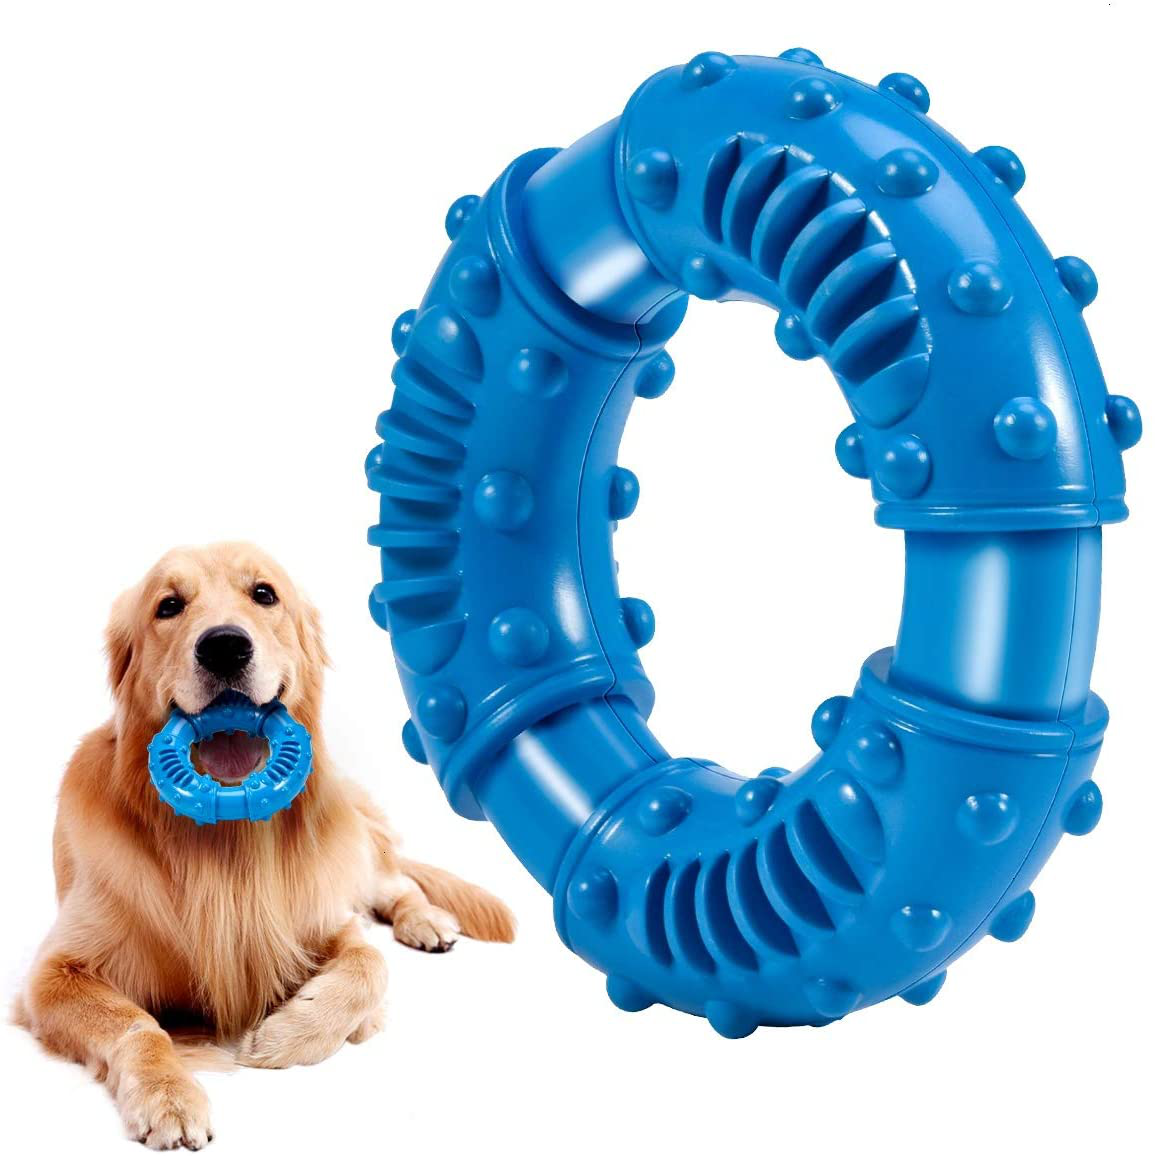 Feeko Dog Chew Toys for Aggressive Chewers Large Breed, Non-Toxic Natural Rubber Long-Lasting Indestructible Dog Toys, Tough Durable Puppy Chew Toy for Medium Large Dogs, Fun to Chew, Chase